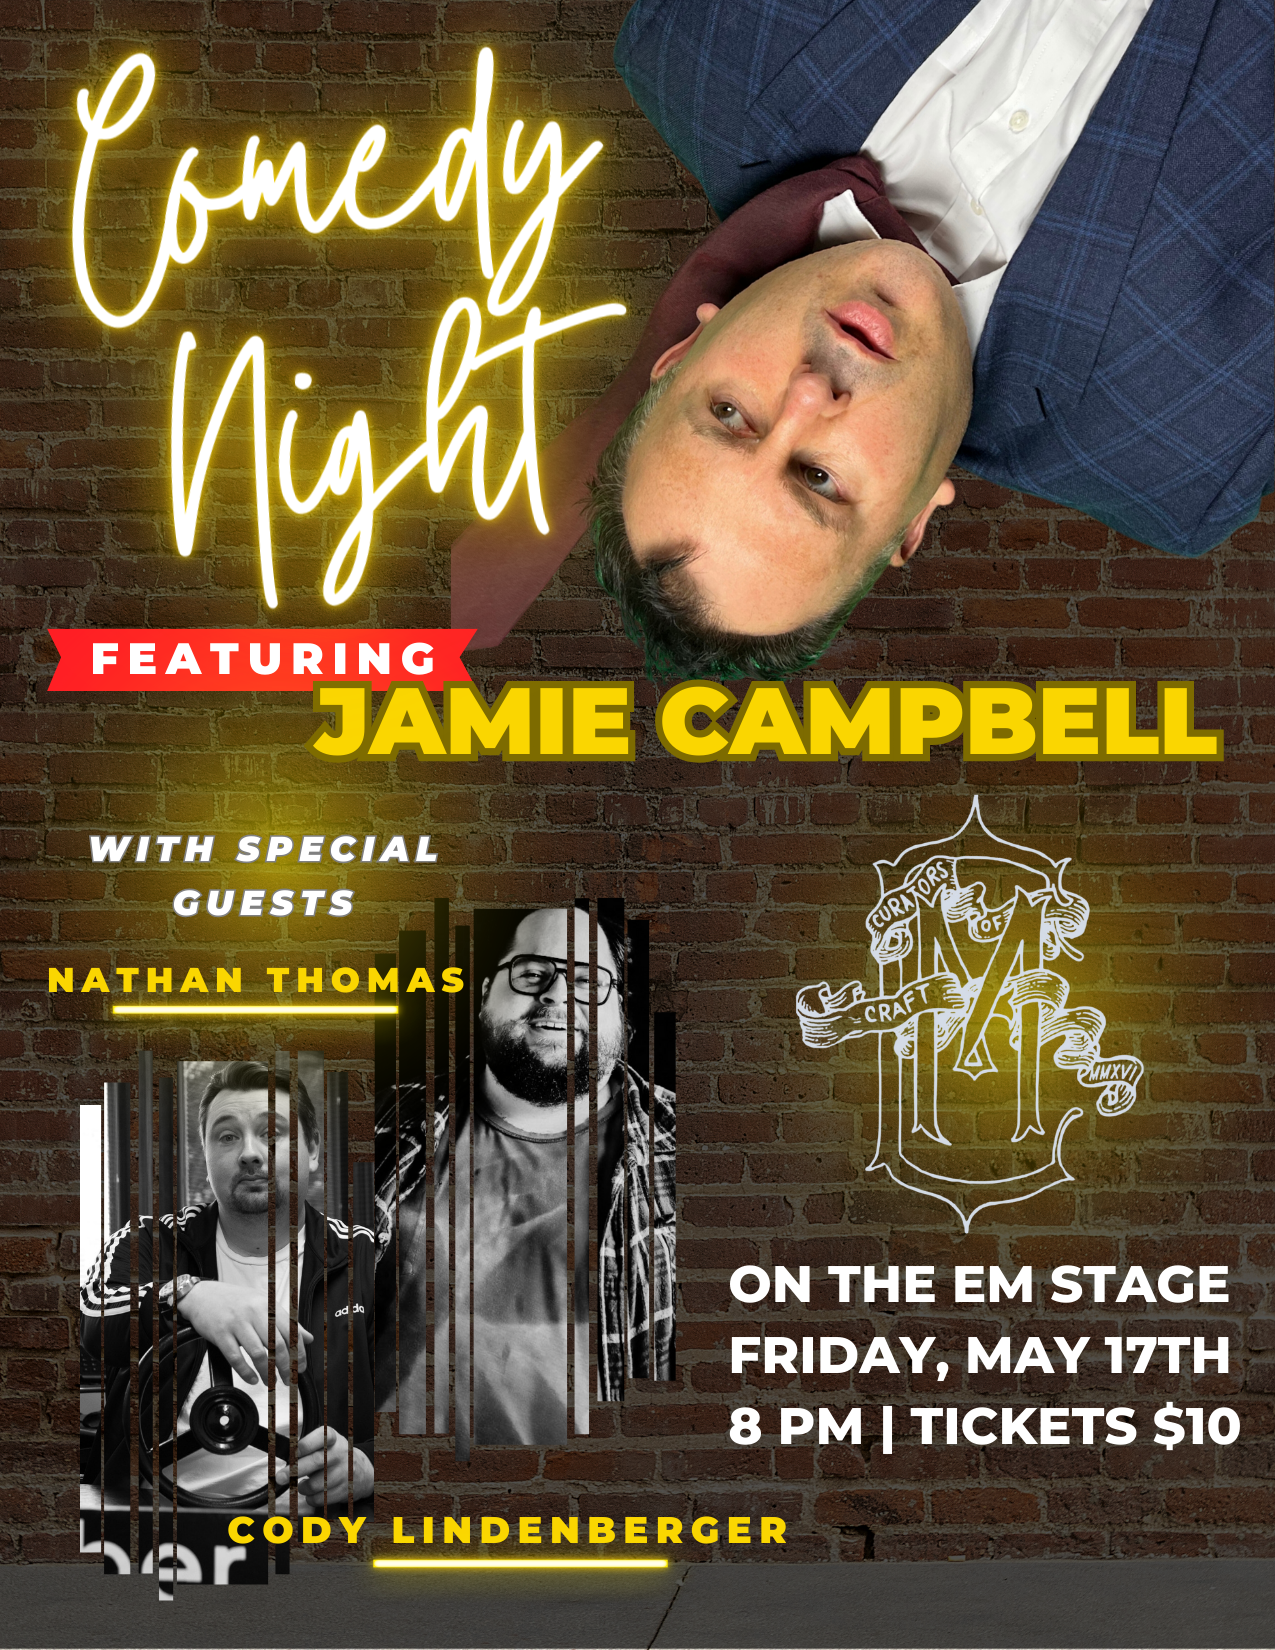 Comedy Night ft. Jamie Campbell